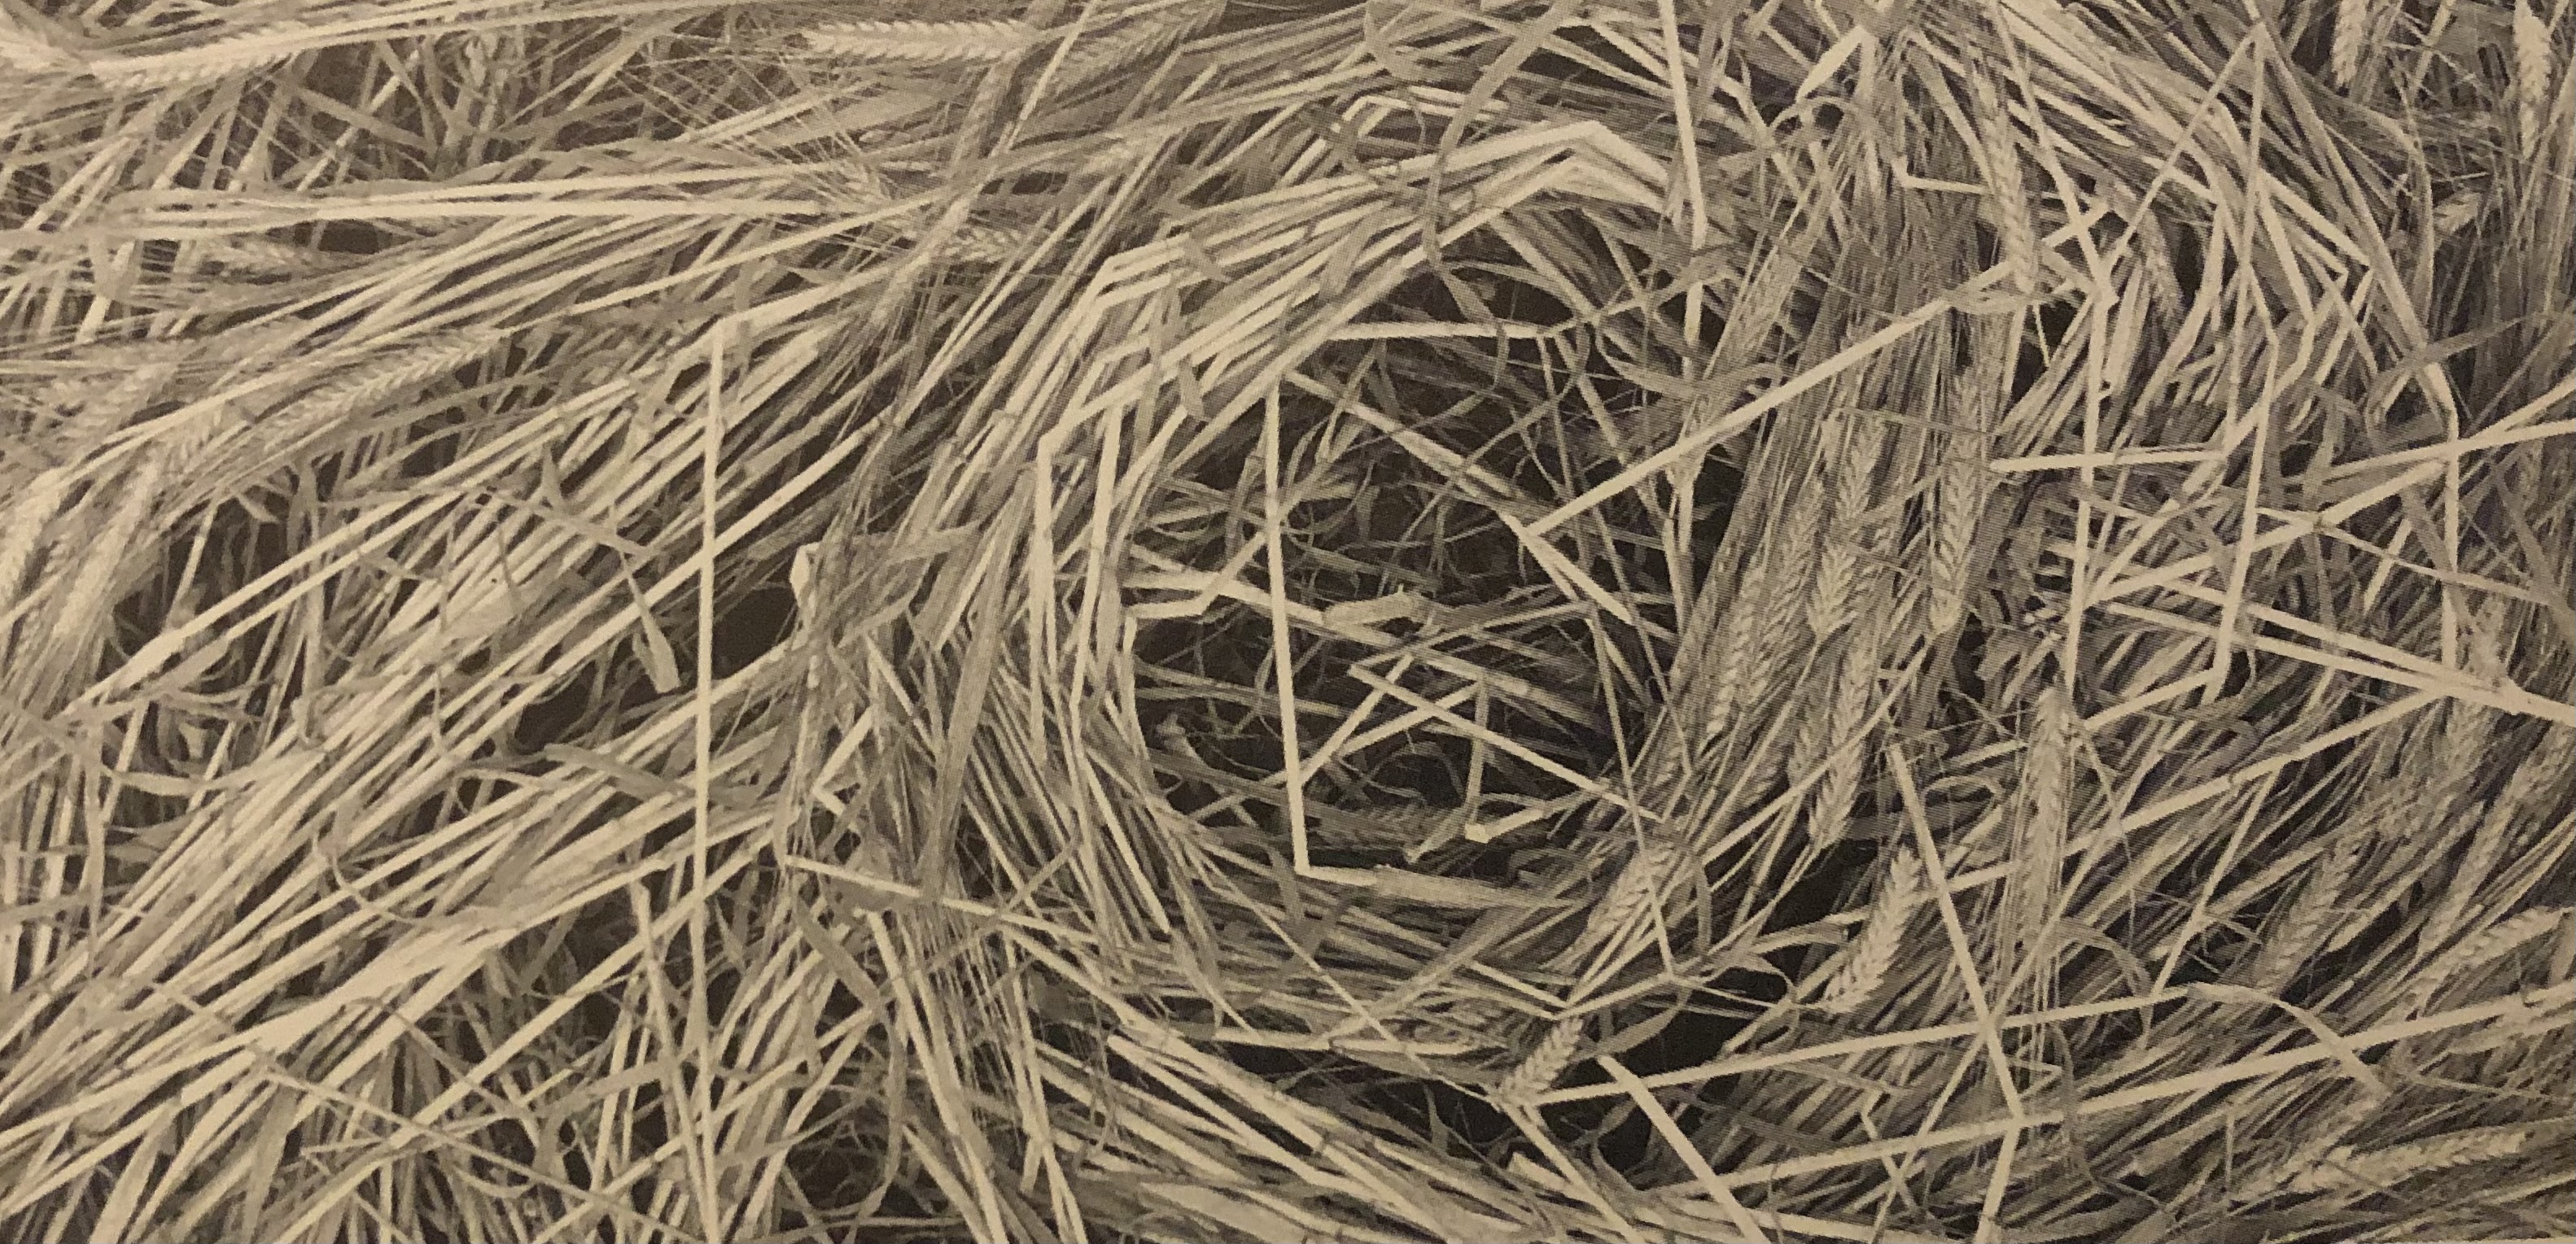 A sepia photograph depicting an up close aerial shot of a nest like hole in the center of flattened wheat stalks.